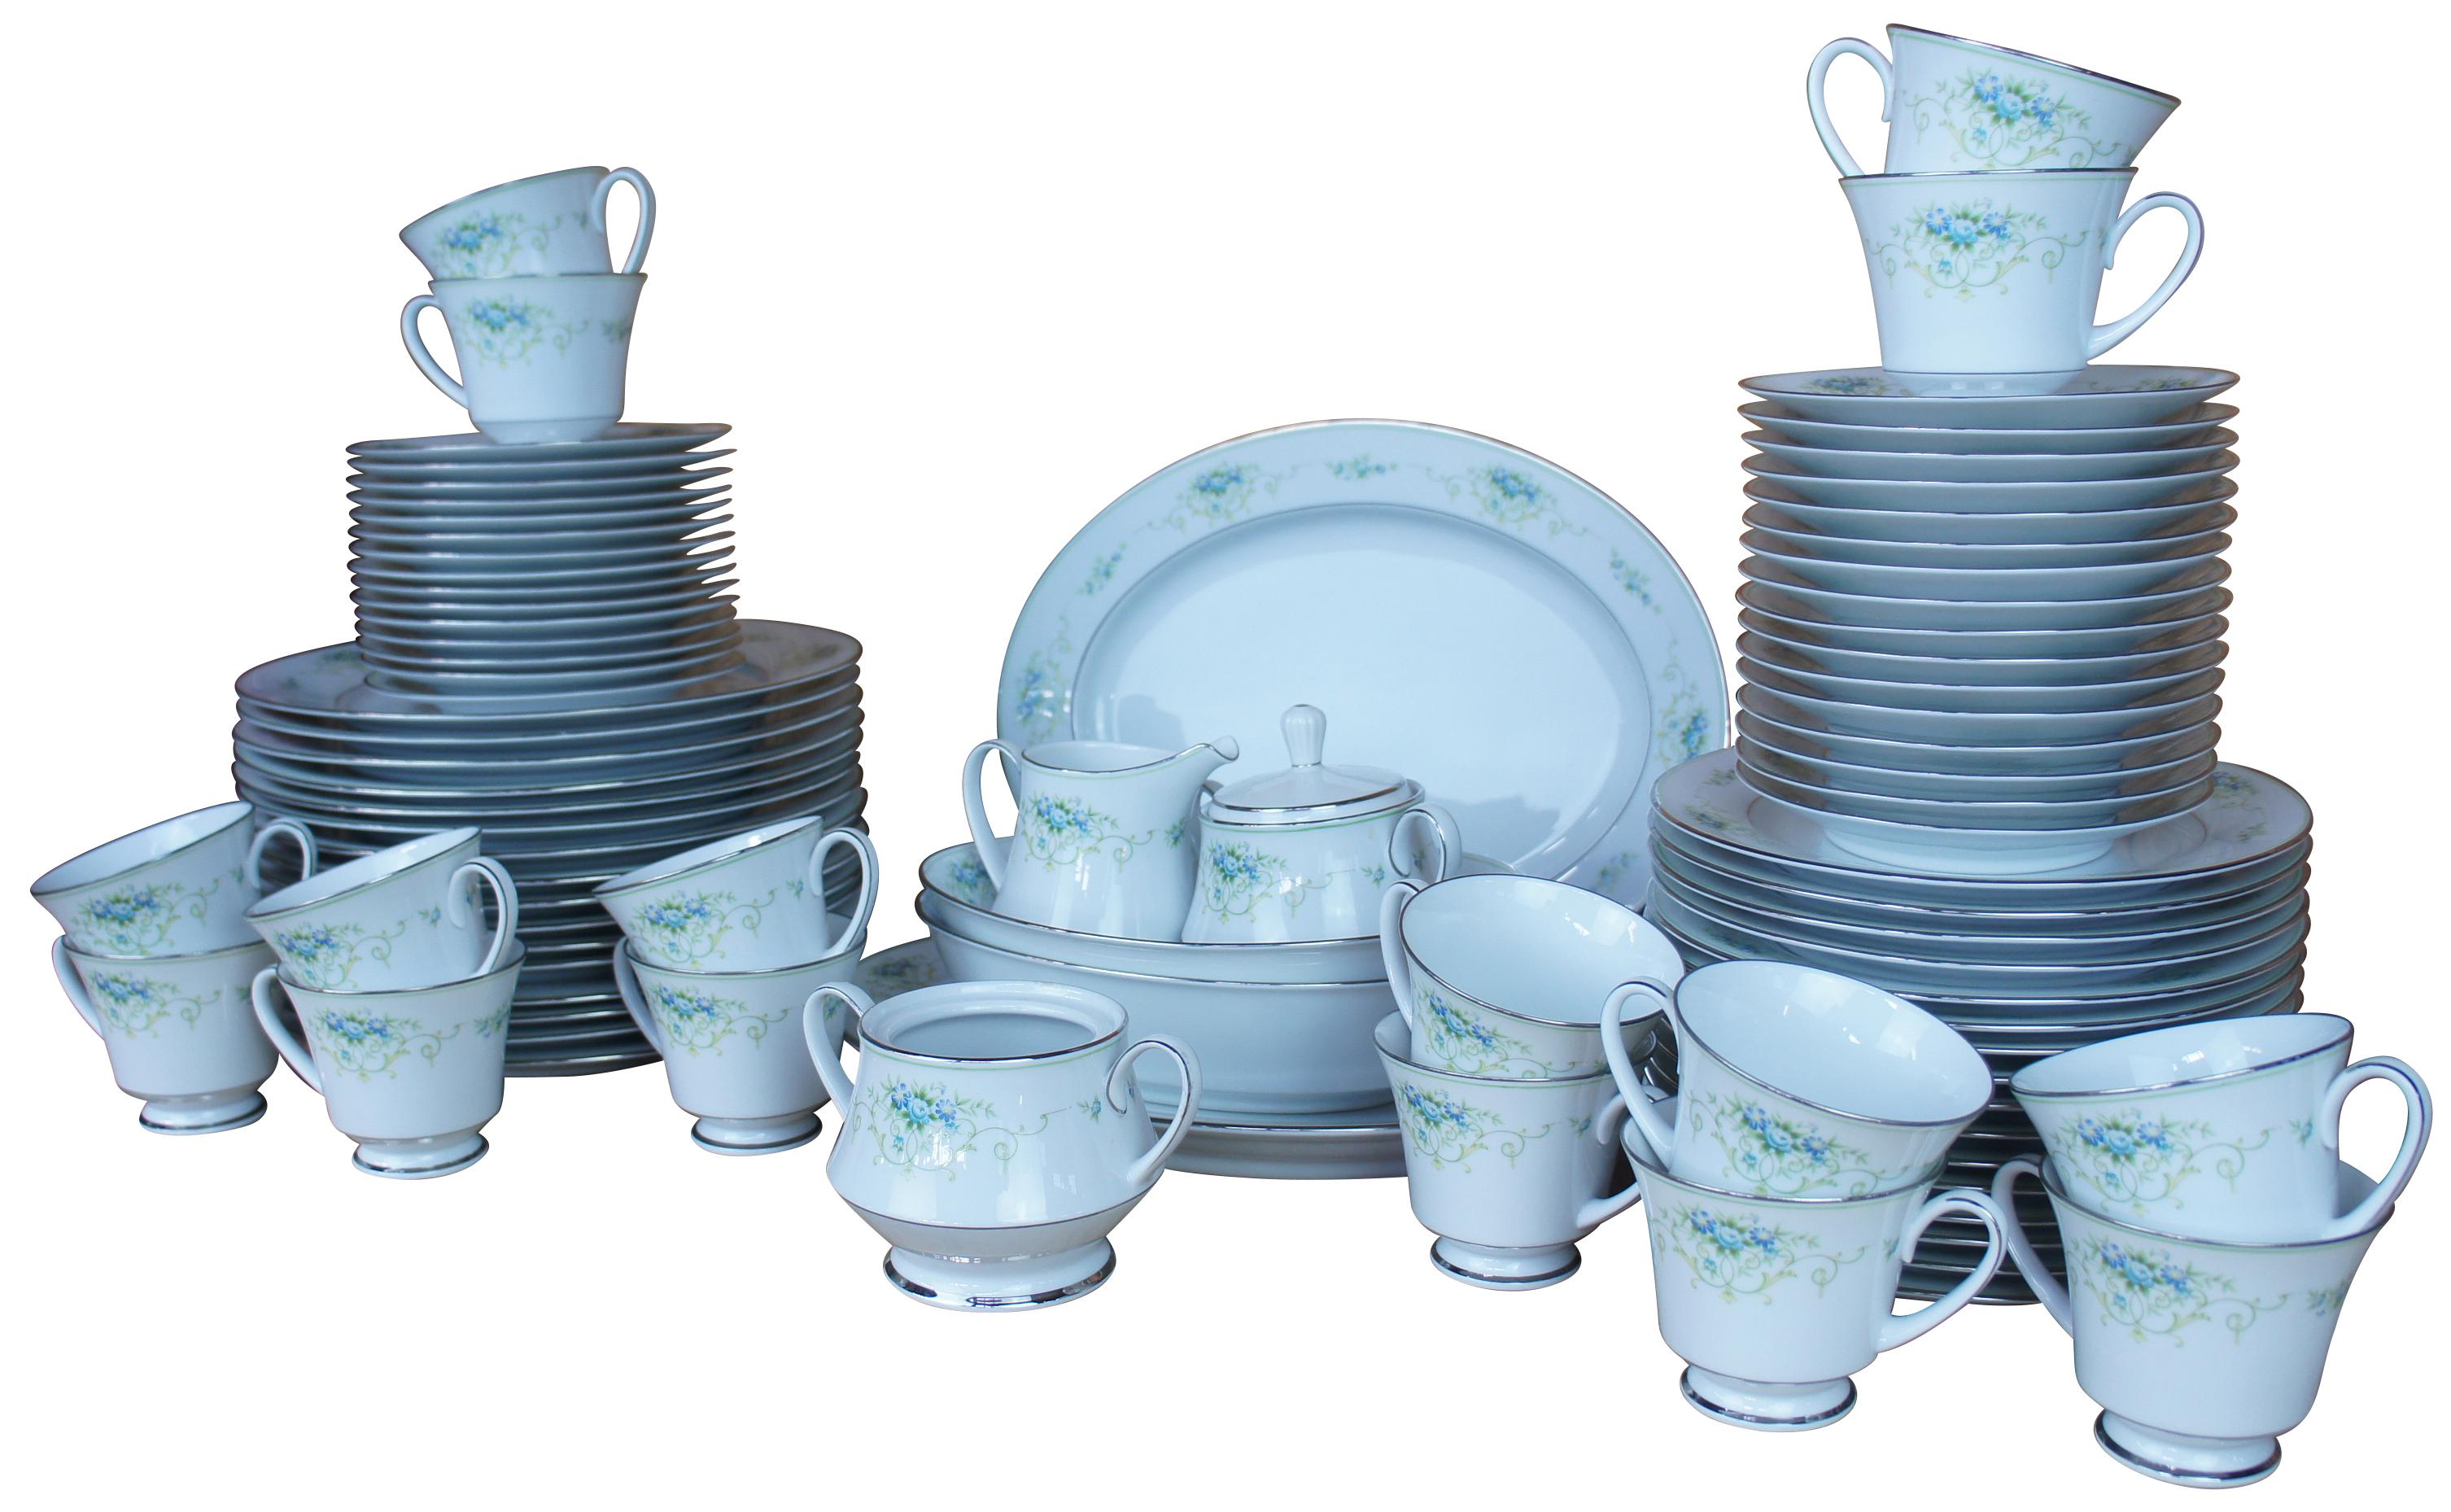 Set of thirty two vintage Noritake Sri Lanka Culeton 2692 dinner and salad plates featuring silver rim with a floral motif of blue, green and yellow.

